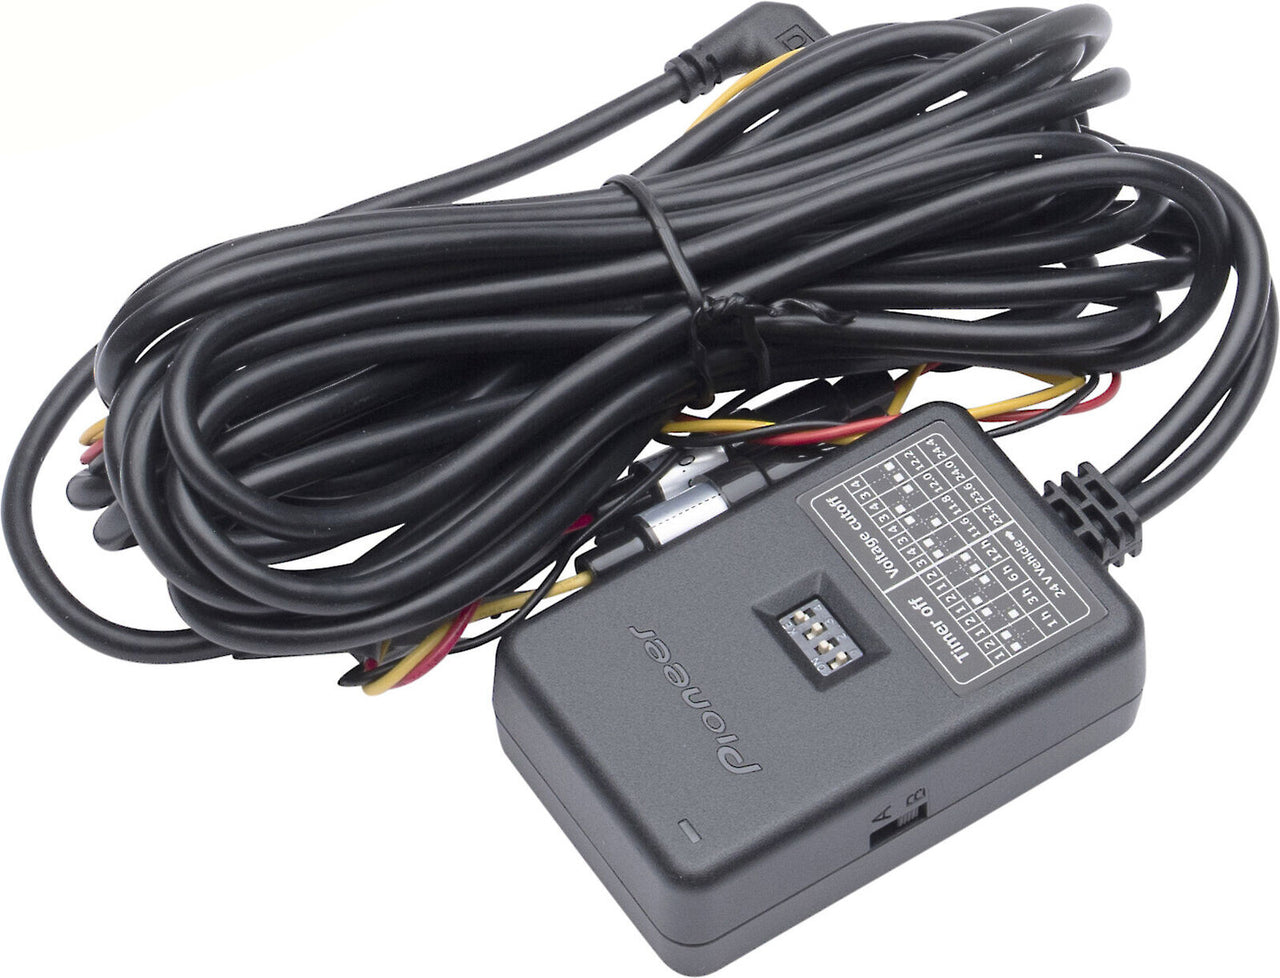 Pioneer RD-HWK200 Hardwire Kit for VREC-DH300D Dash Cam – absoluteusa